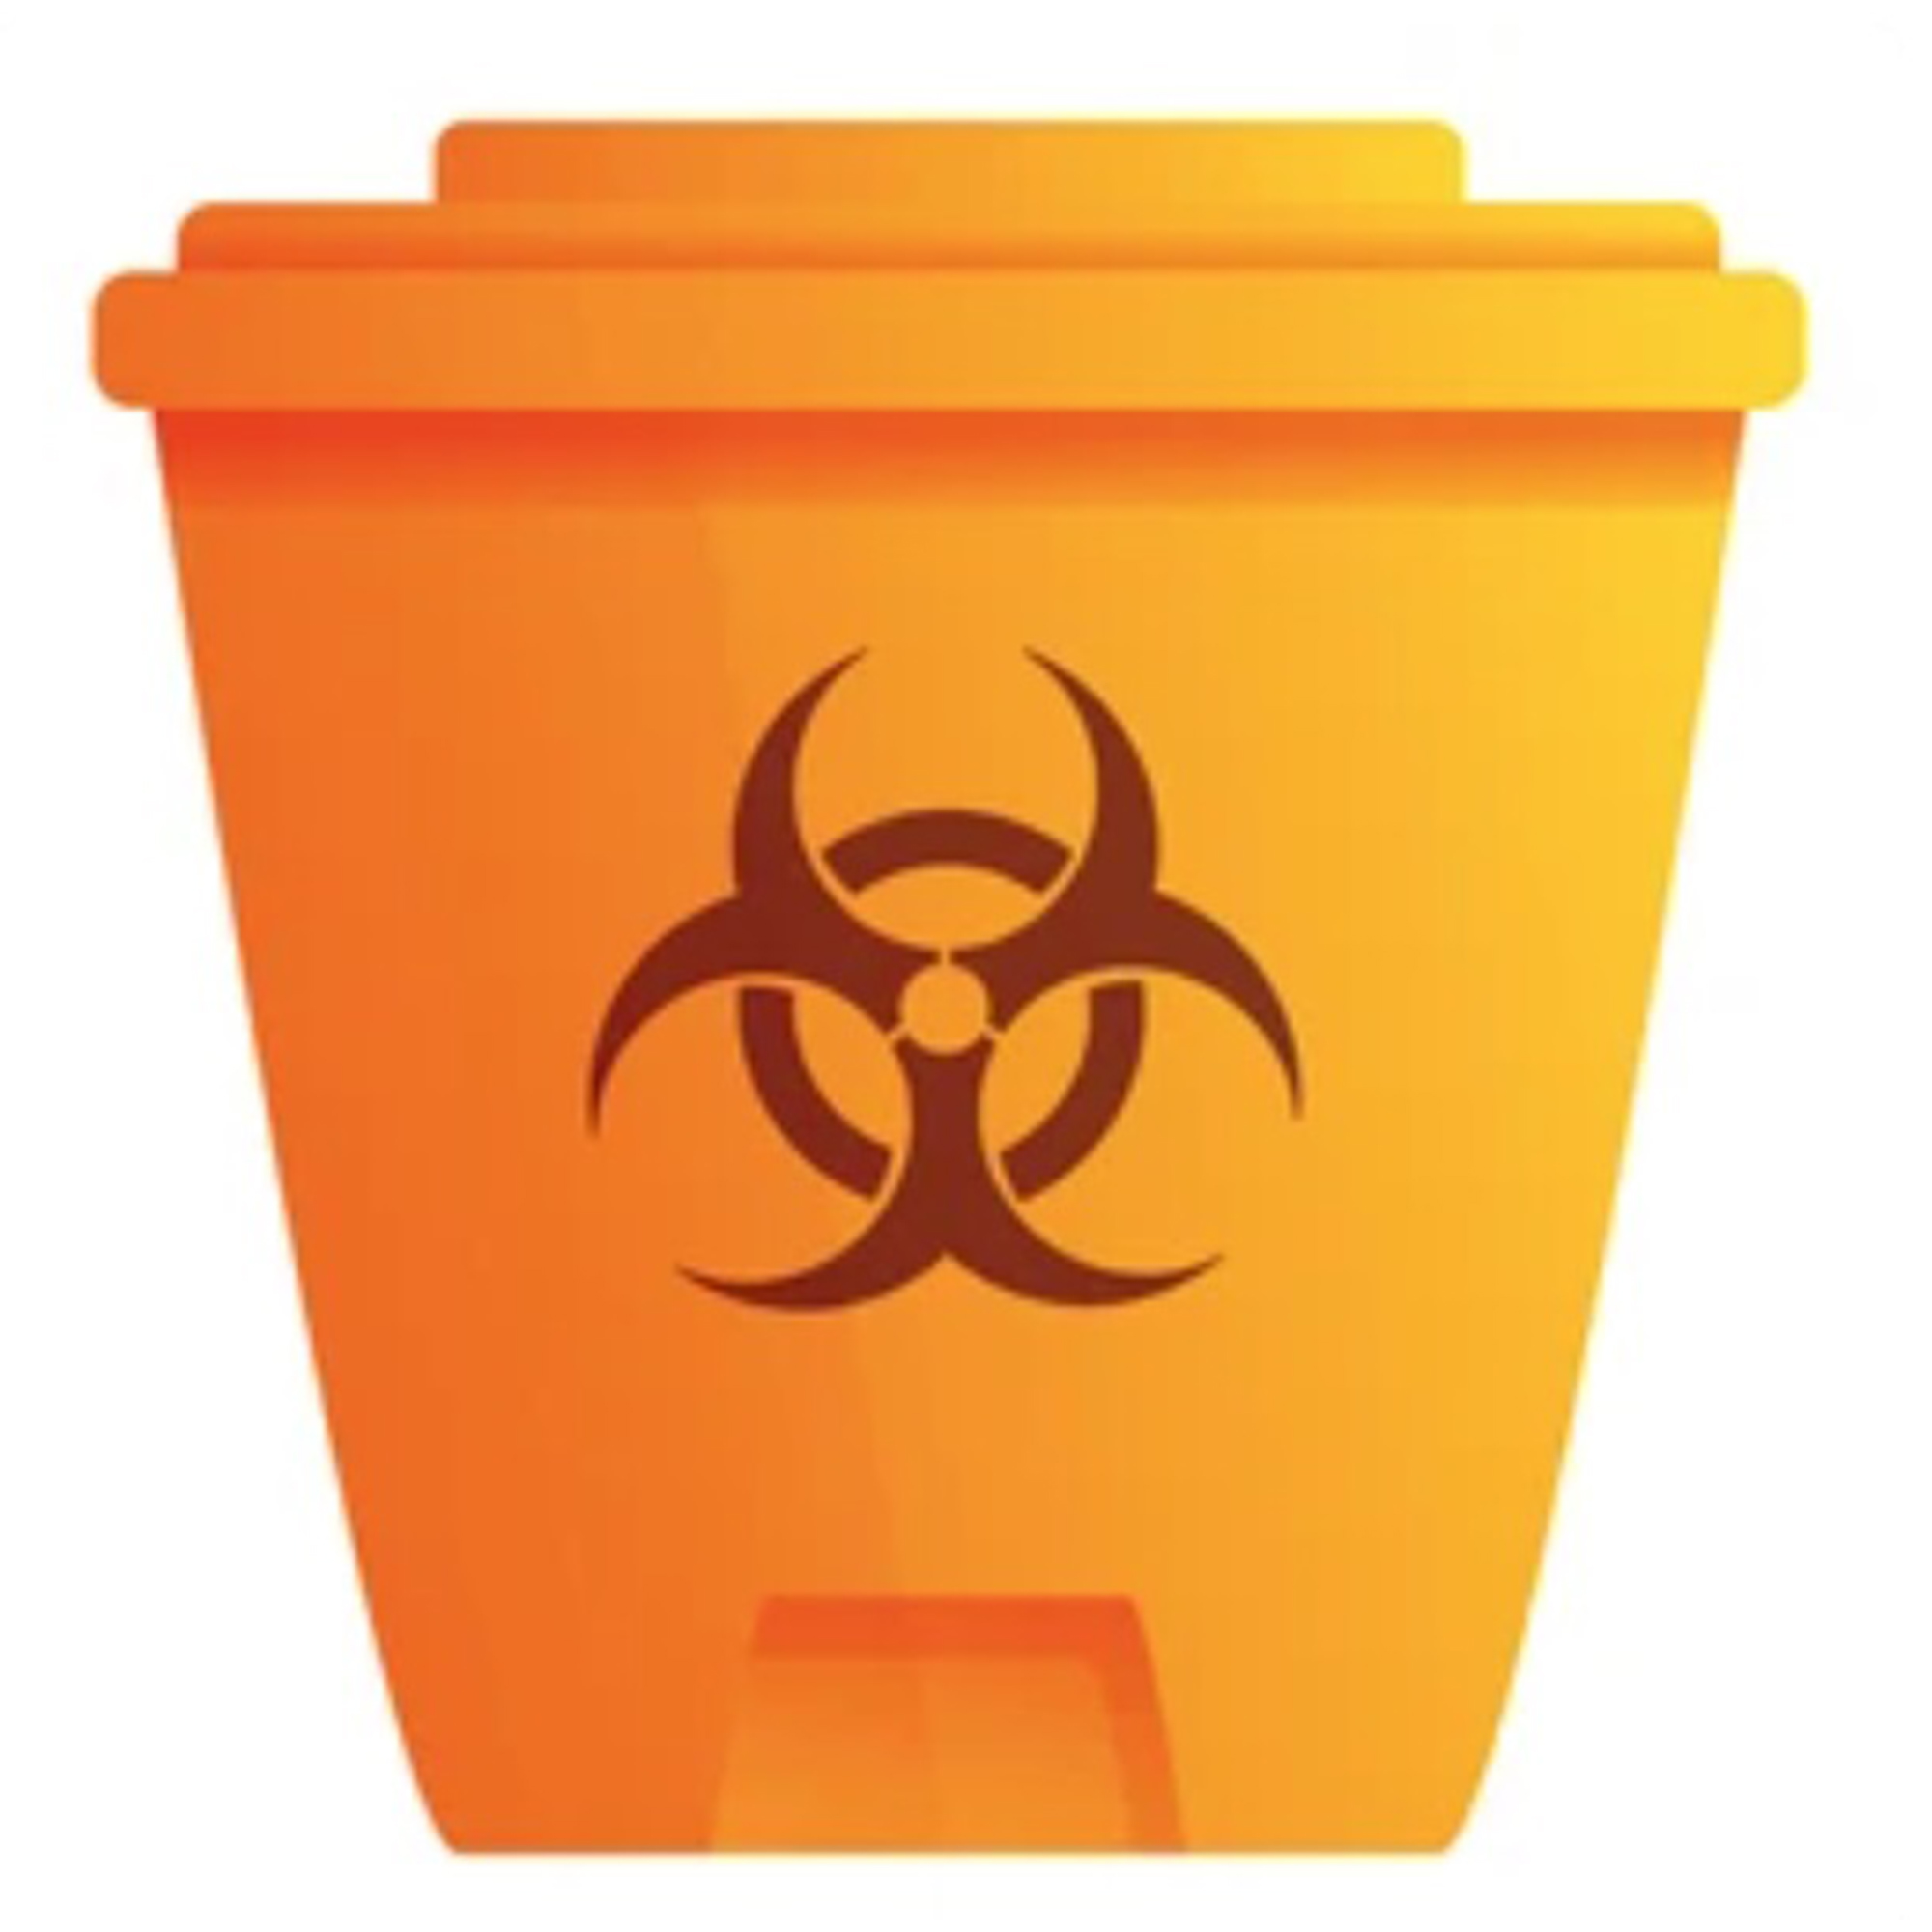 Medical practice/INFECTIOUS MEDICAL WASTE/Medical Waste Plastic Containers